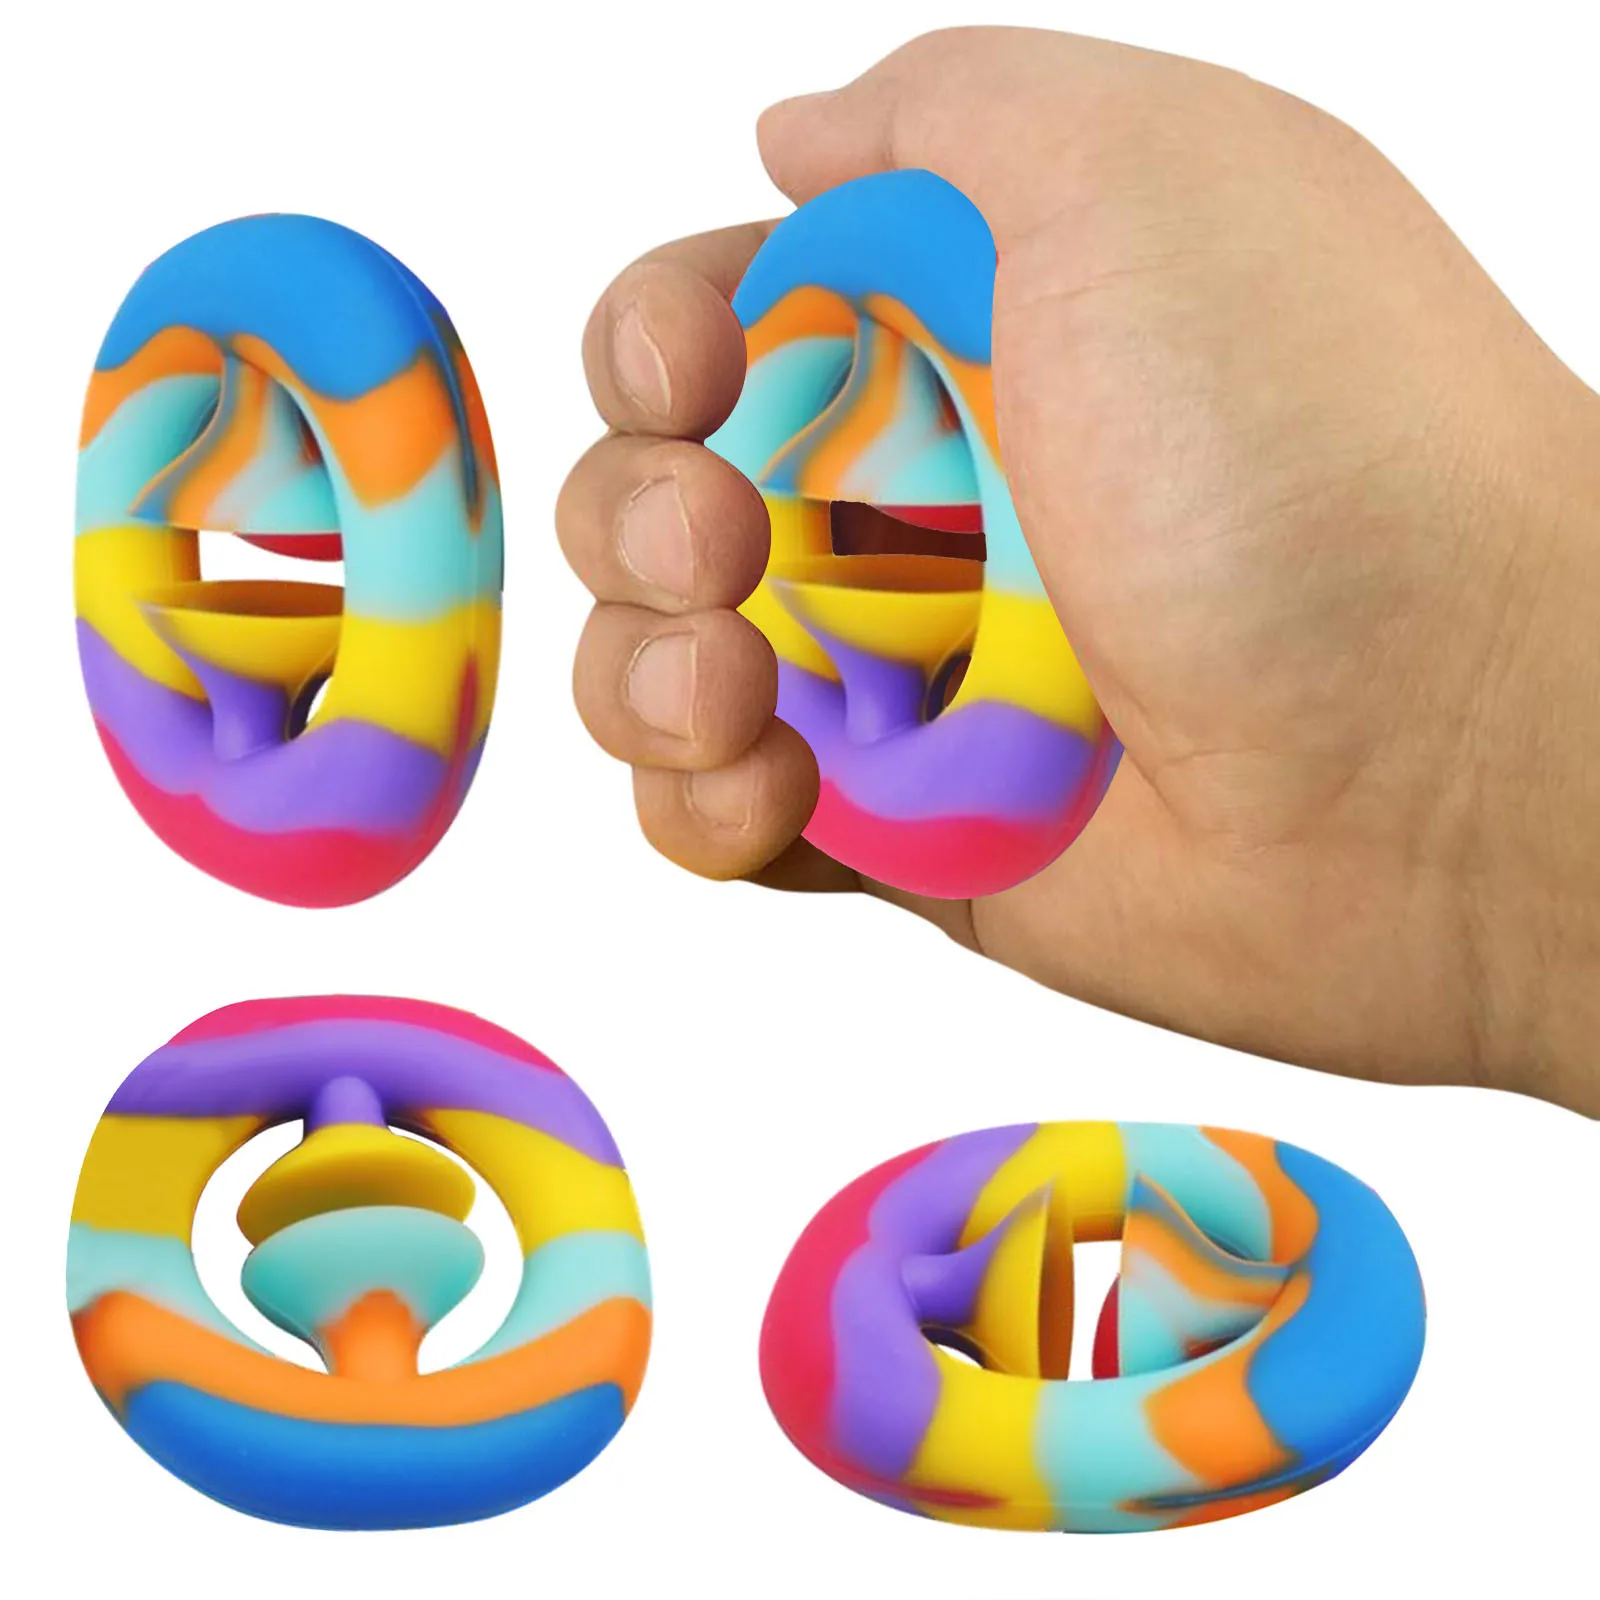 

NEW Fidgets Antistress Toys Hand Grip Ring Relief Stress Sensory Toy Autism Special Needs Anxiety Reliever Grip Ball Figet Toys